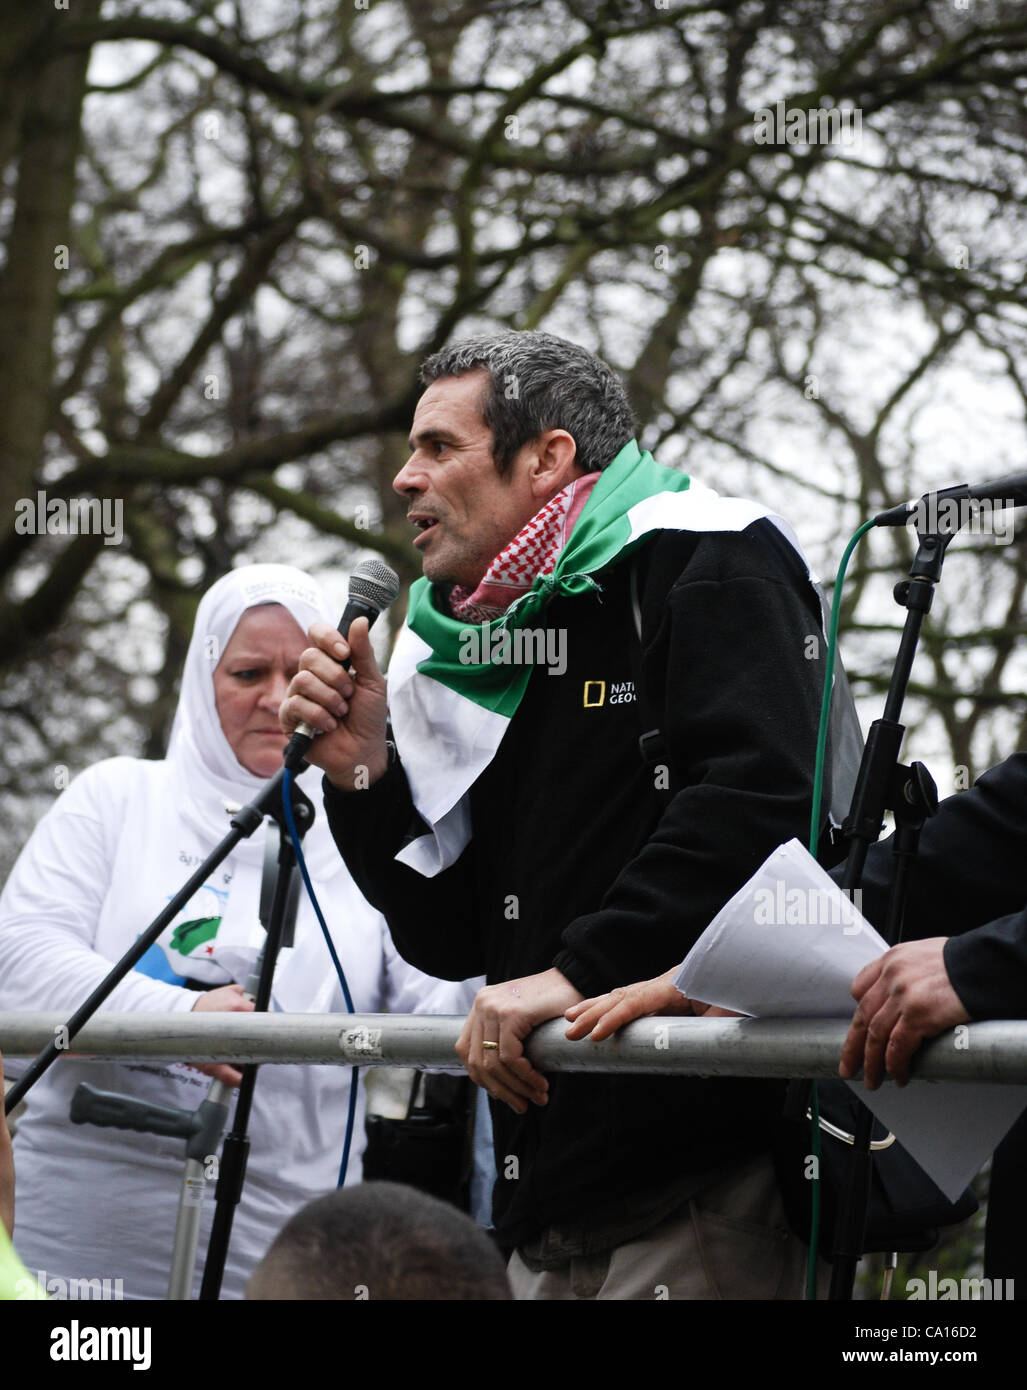 17/03/2012, London, UK: Paul Conroy, injured Sunday Times photographer, speaks at an Anti-Assad rally outside the Syrian Embassy in London. Stock Photo